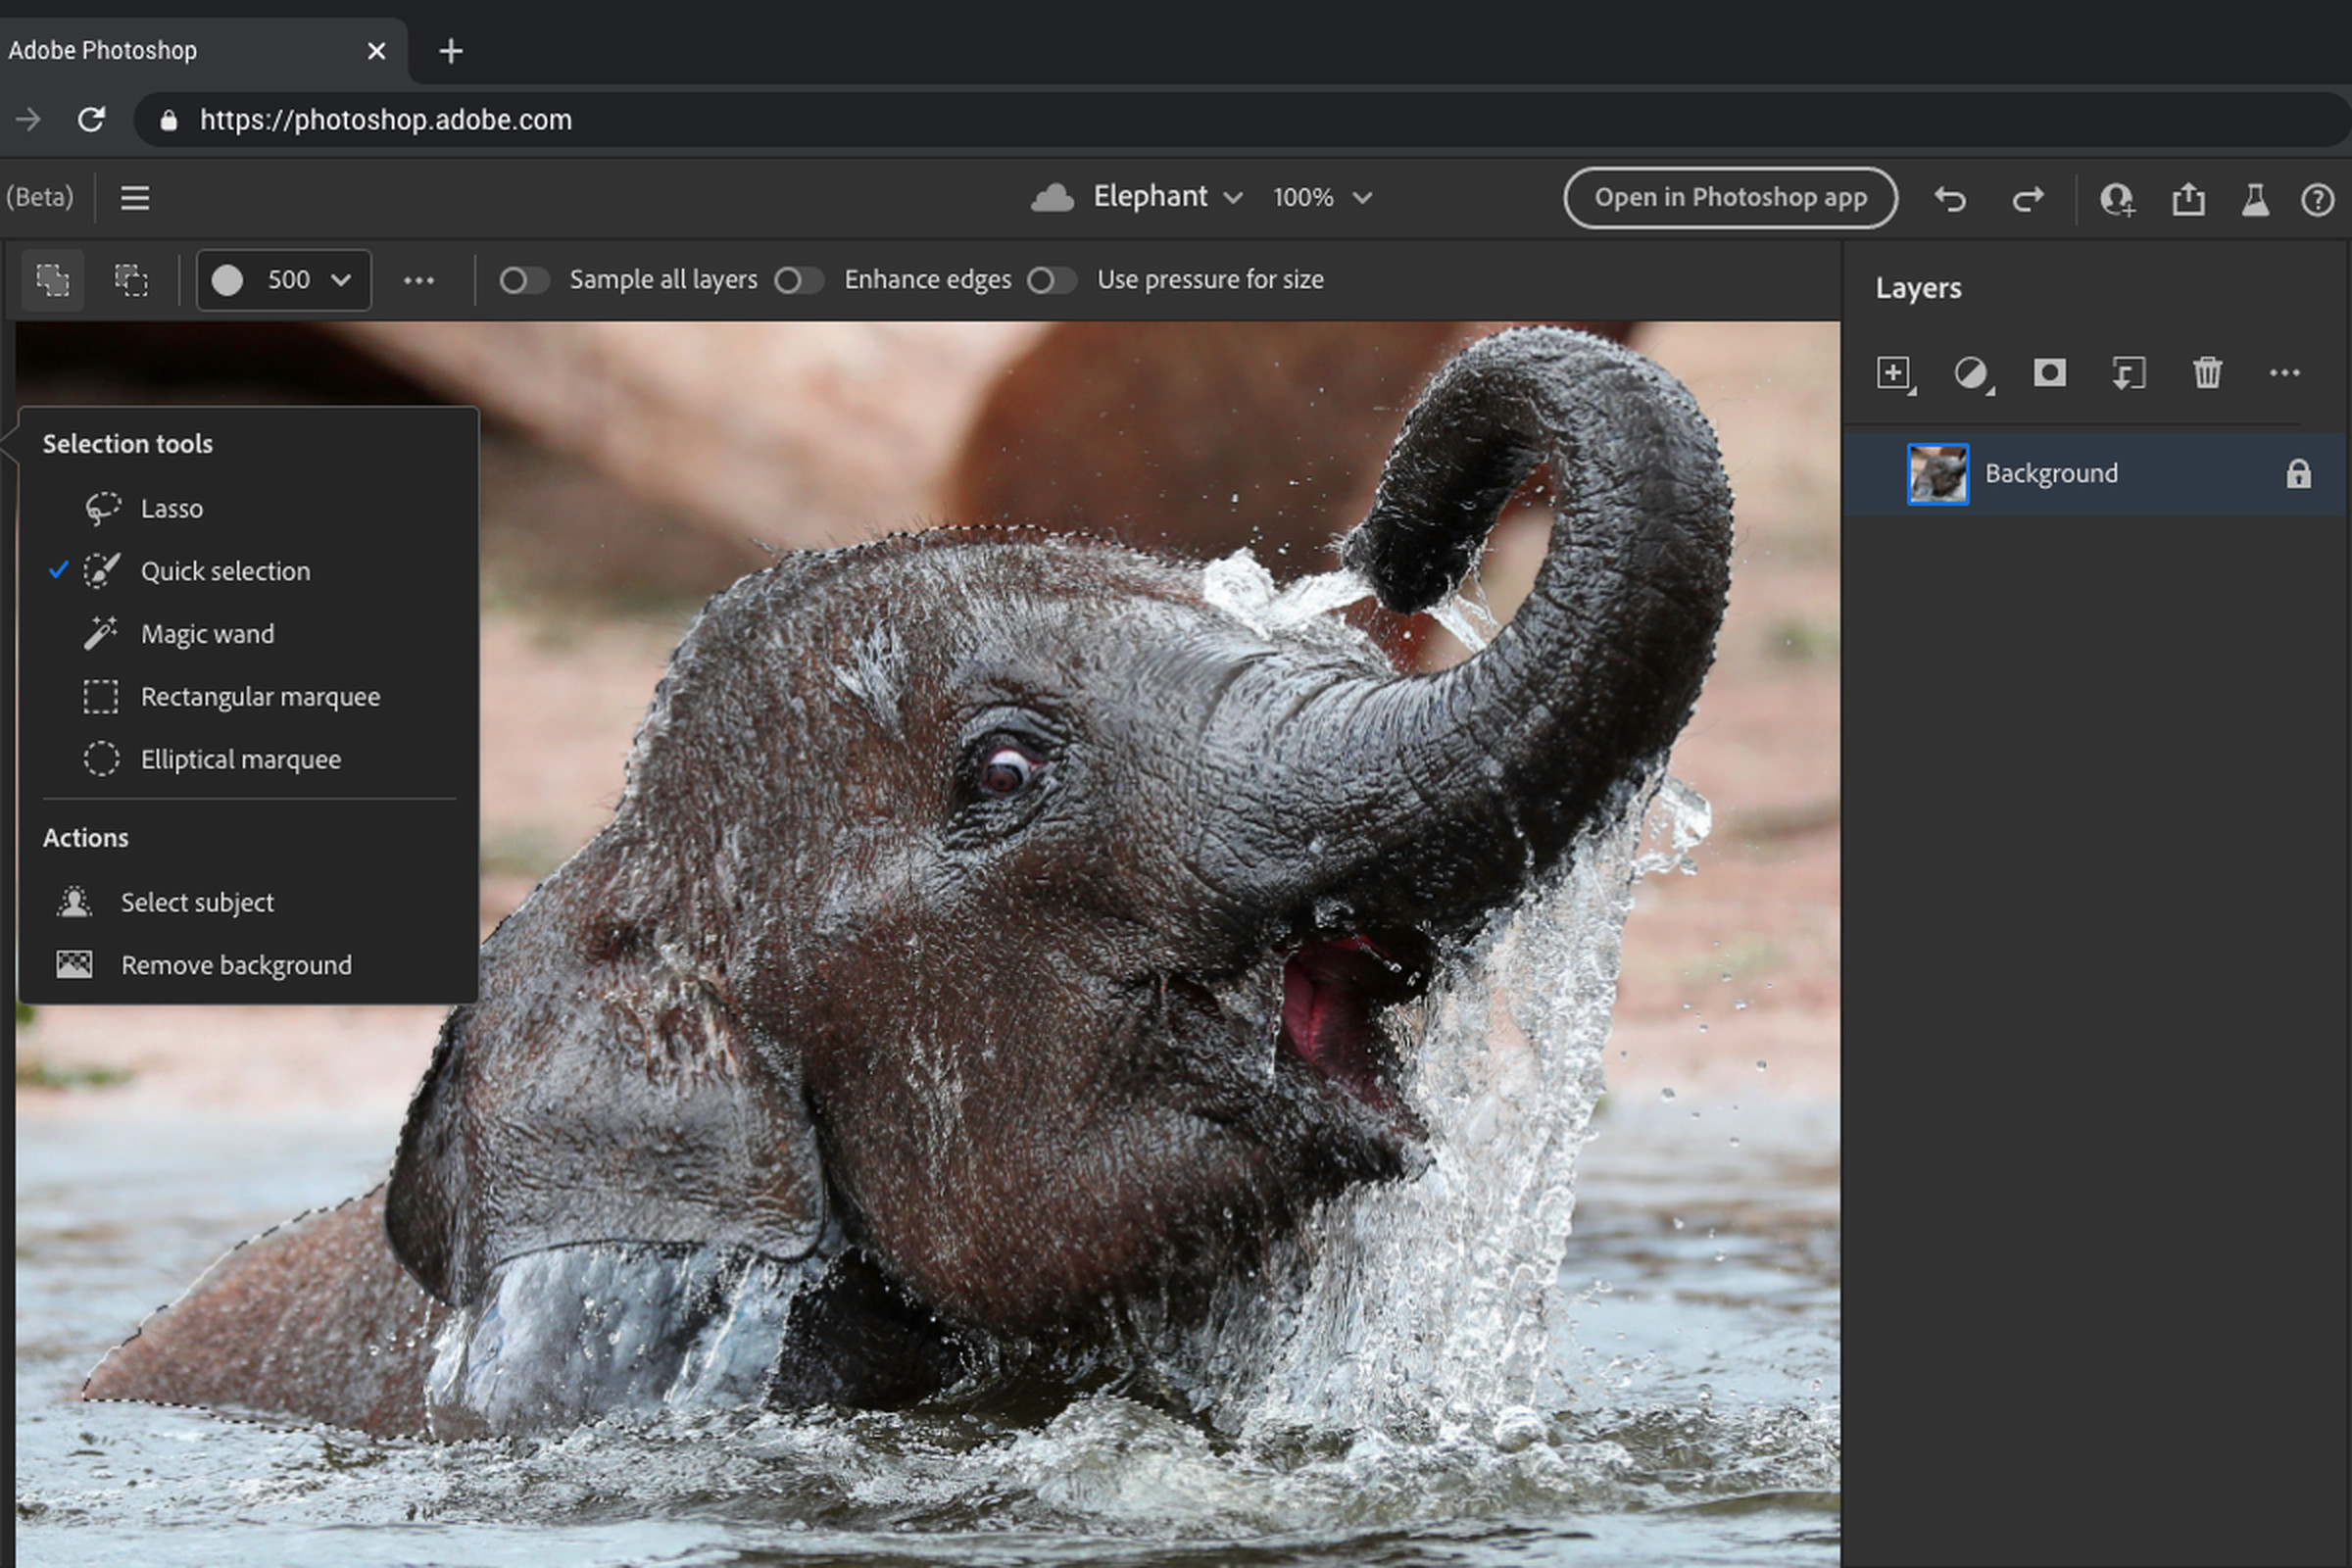 The beta of Photoshop on the web.